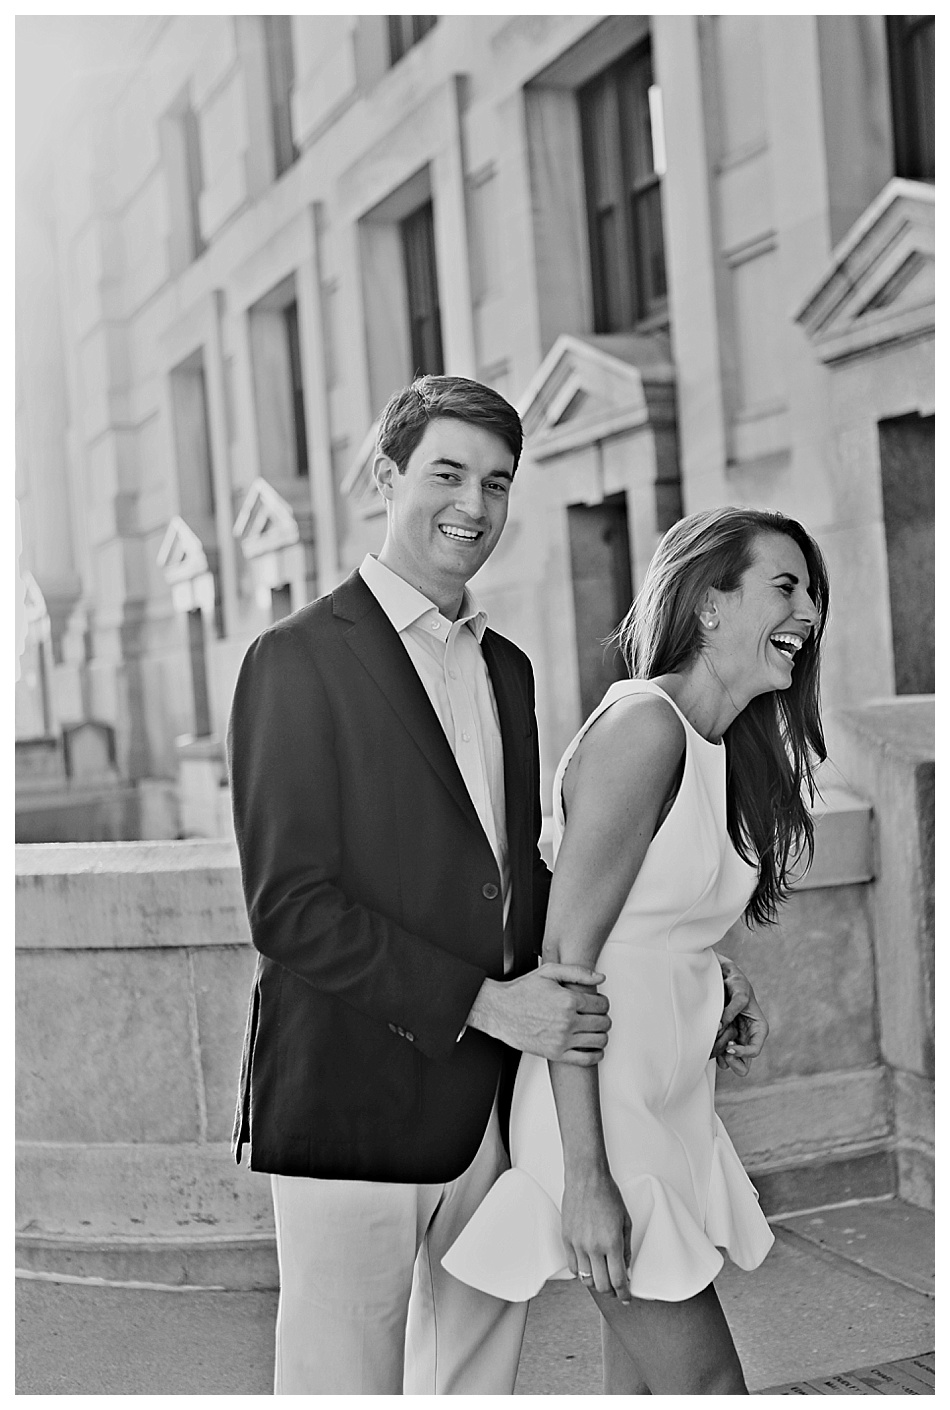 Downtown Kansas City Engagement Session | http://www.emmalinebride.com/real-weddings/downtown-kansas-city-engagement-session-snap-photography/ | photo: SNAP Photography - Kansas City Missouri Wedding Photographer